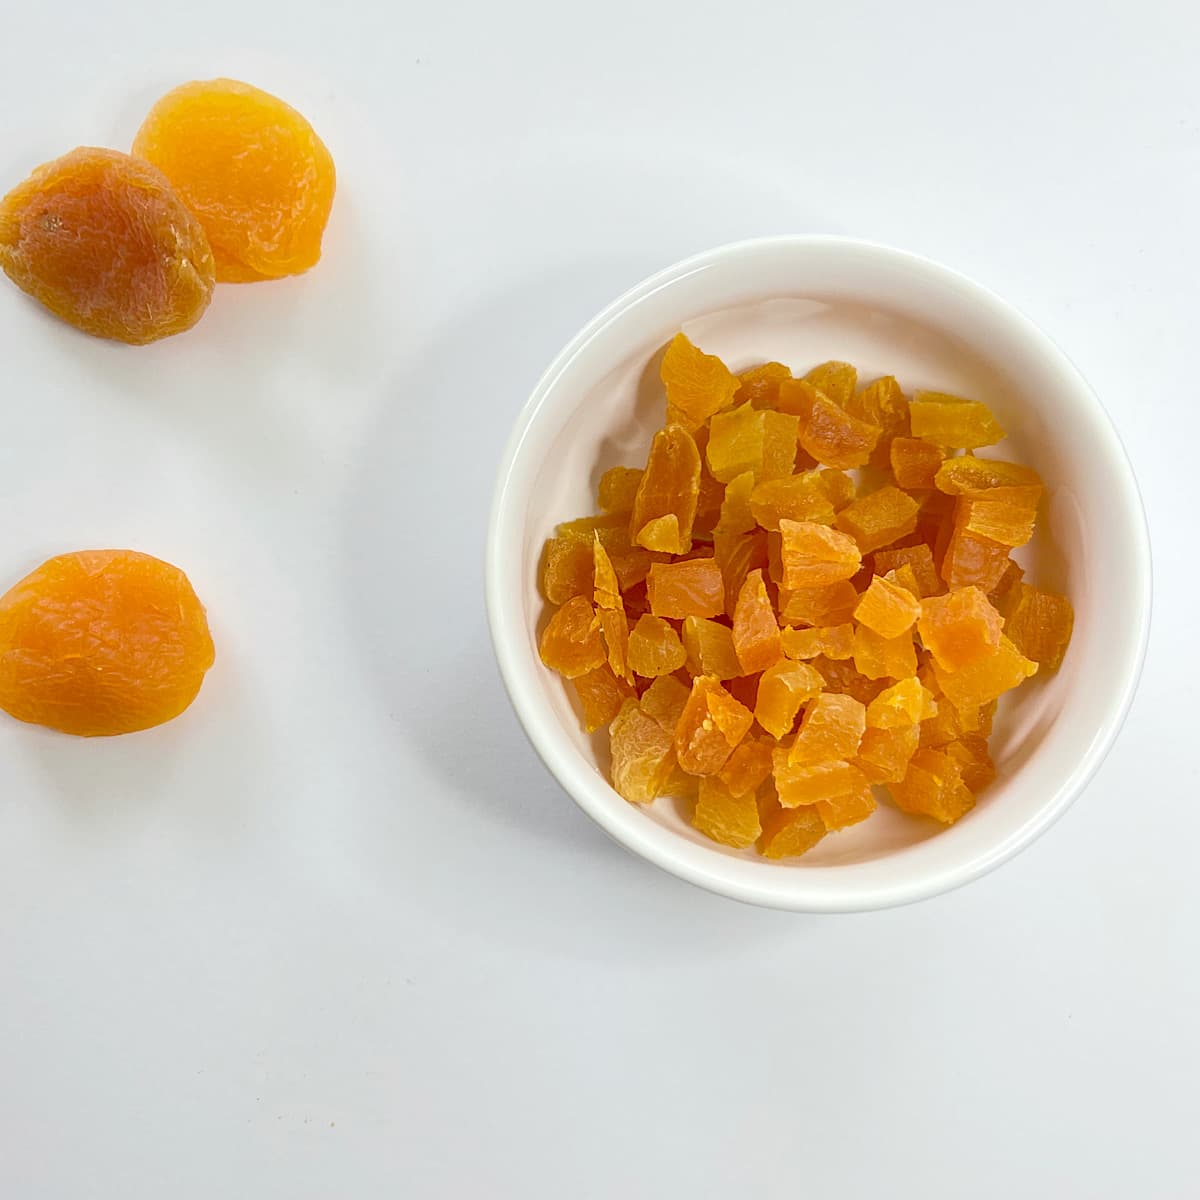 chopped dried apricots in a bowl next to 3 whole apricots